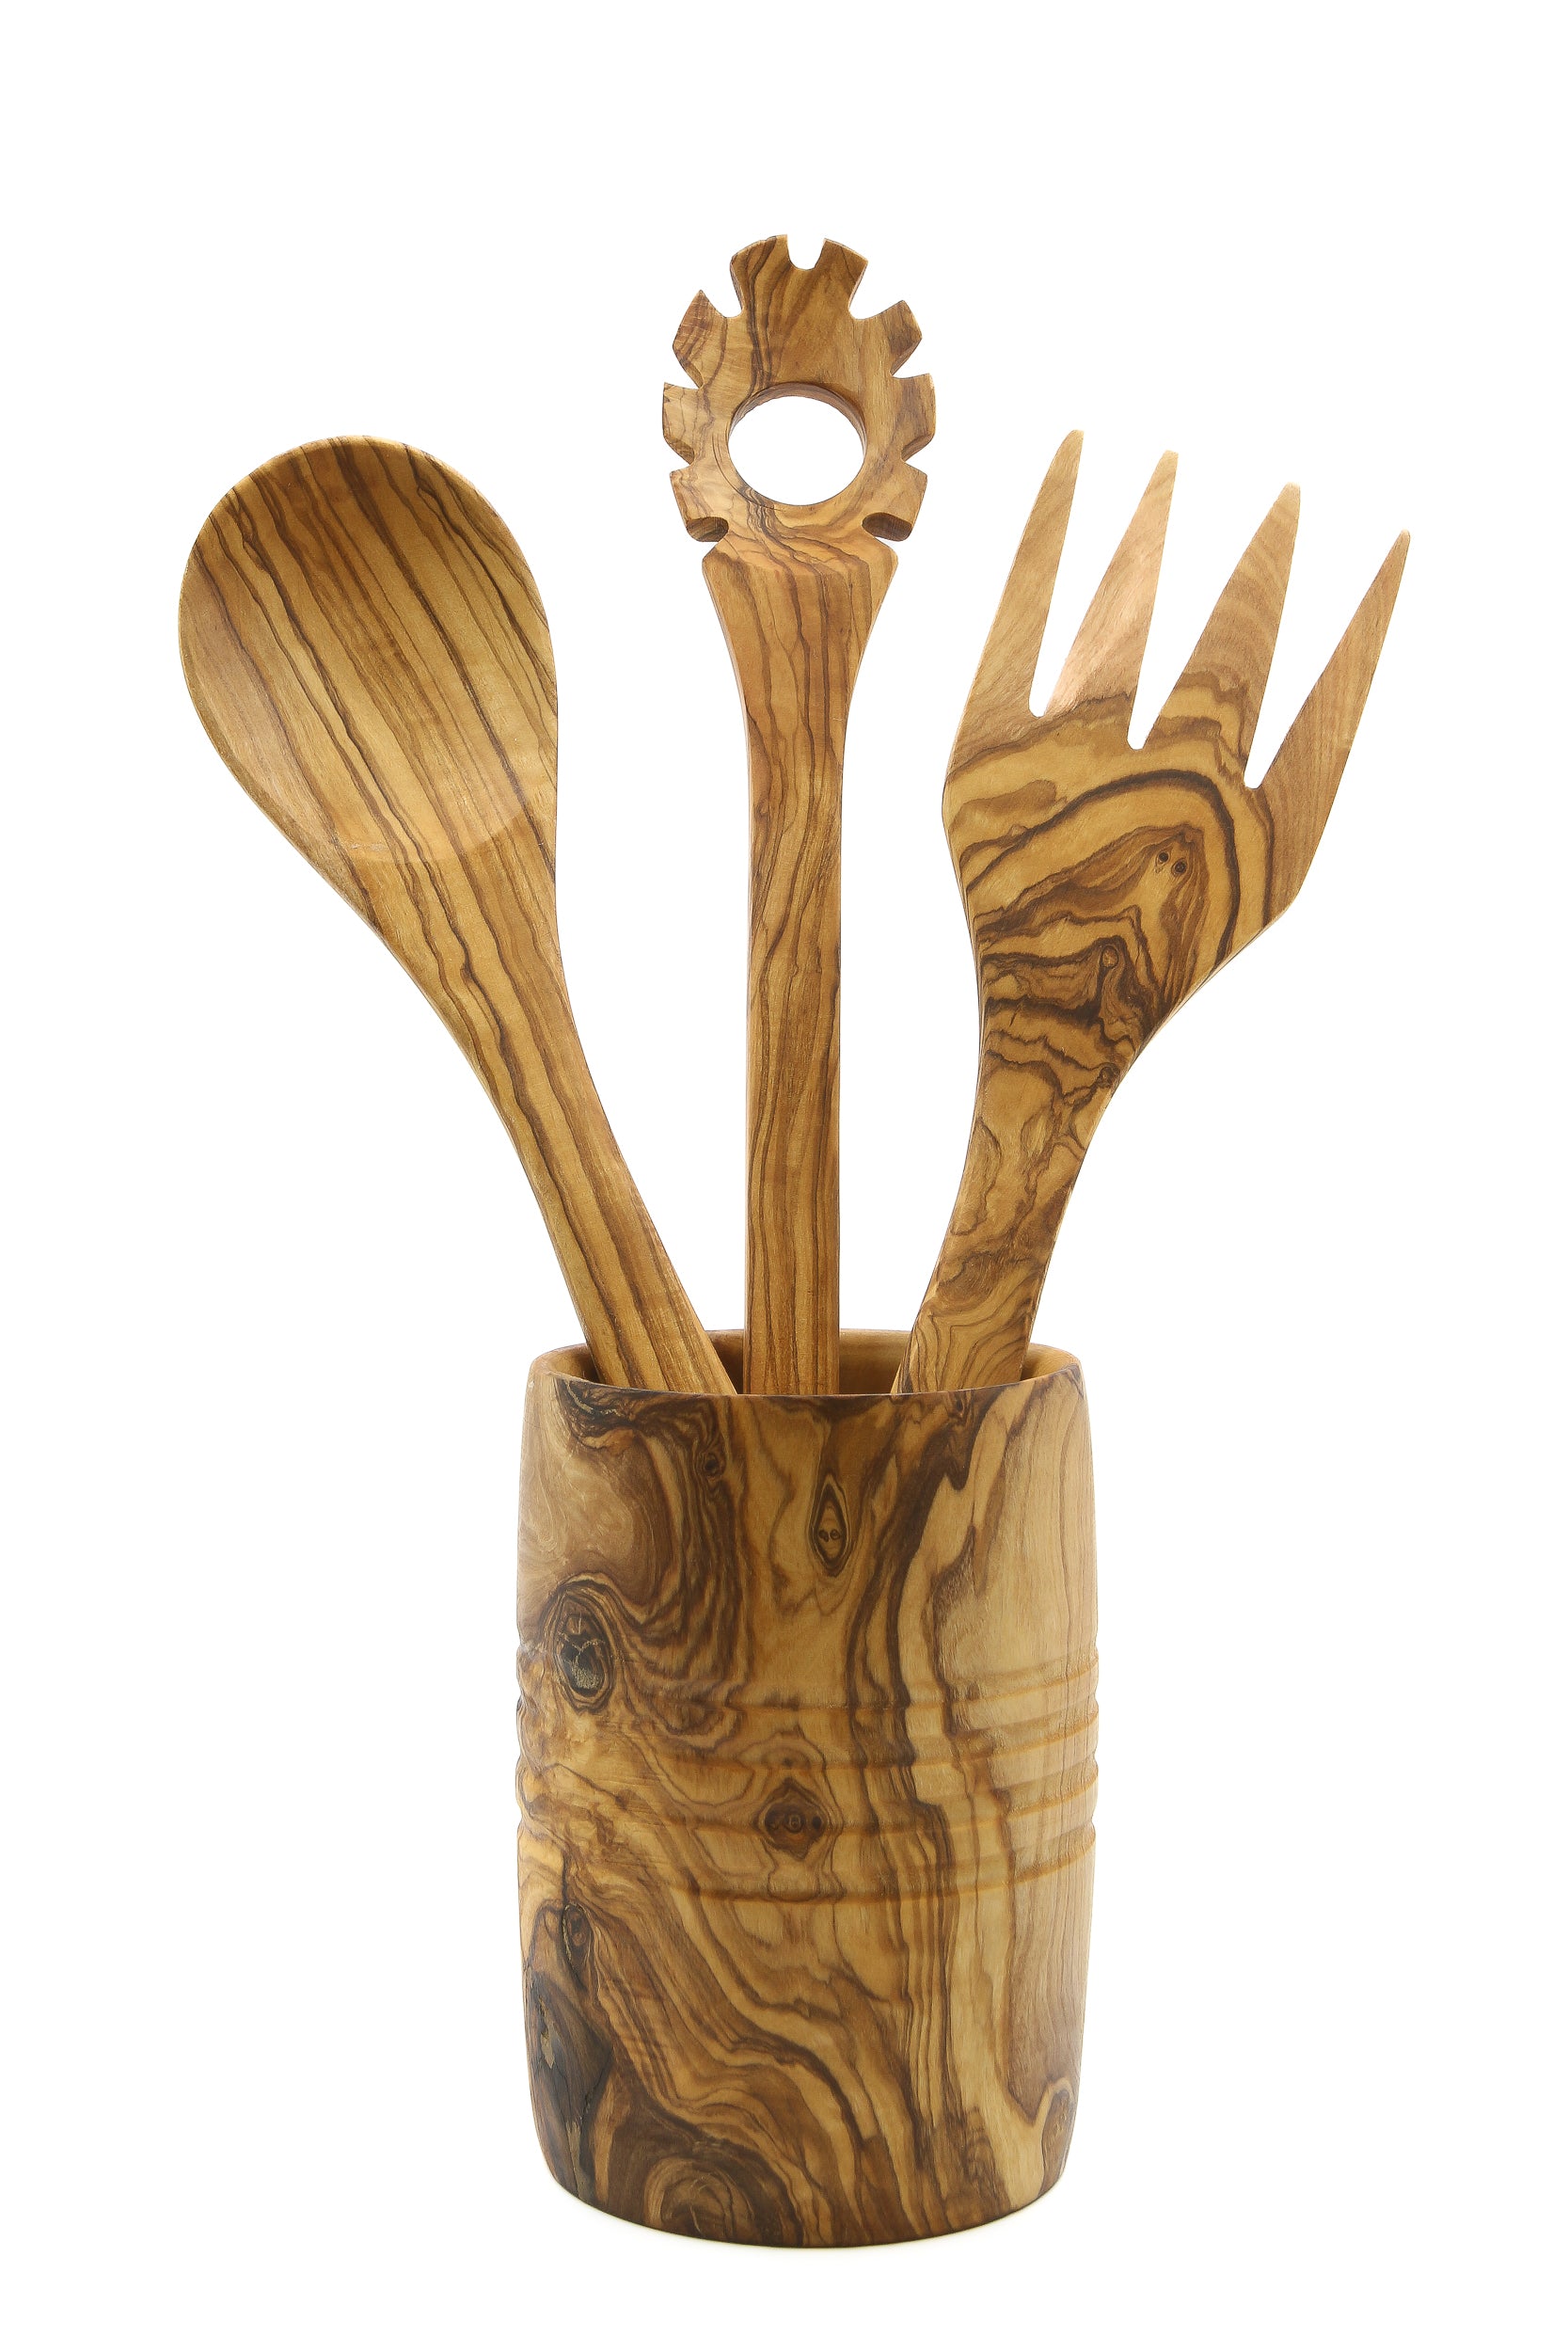 Artisan-made olive wood kitchenware set, complete with essential utensils and a utensil holder